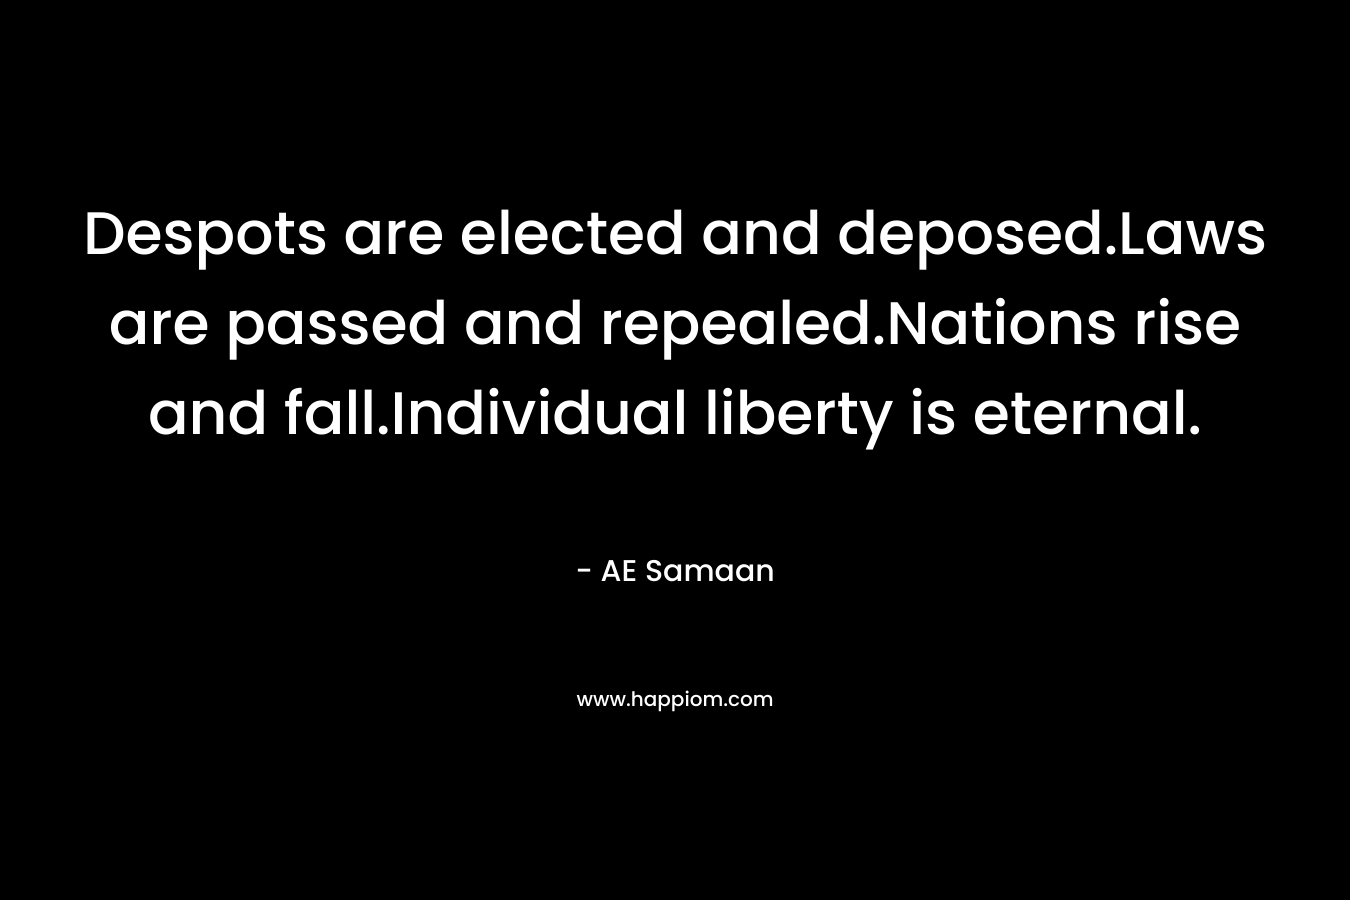 Despots are elected and deposed.Laws are passed and repealed.Nations rise and fall.Individual liberty is eternal.